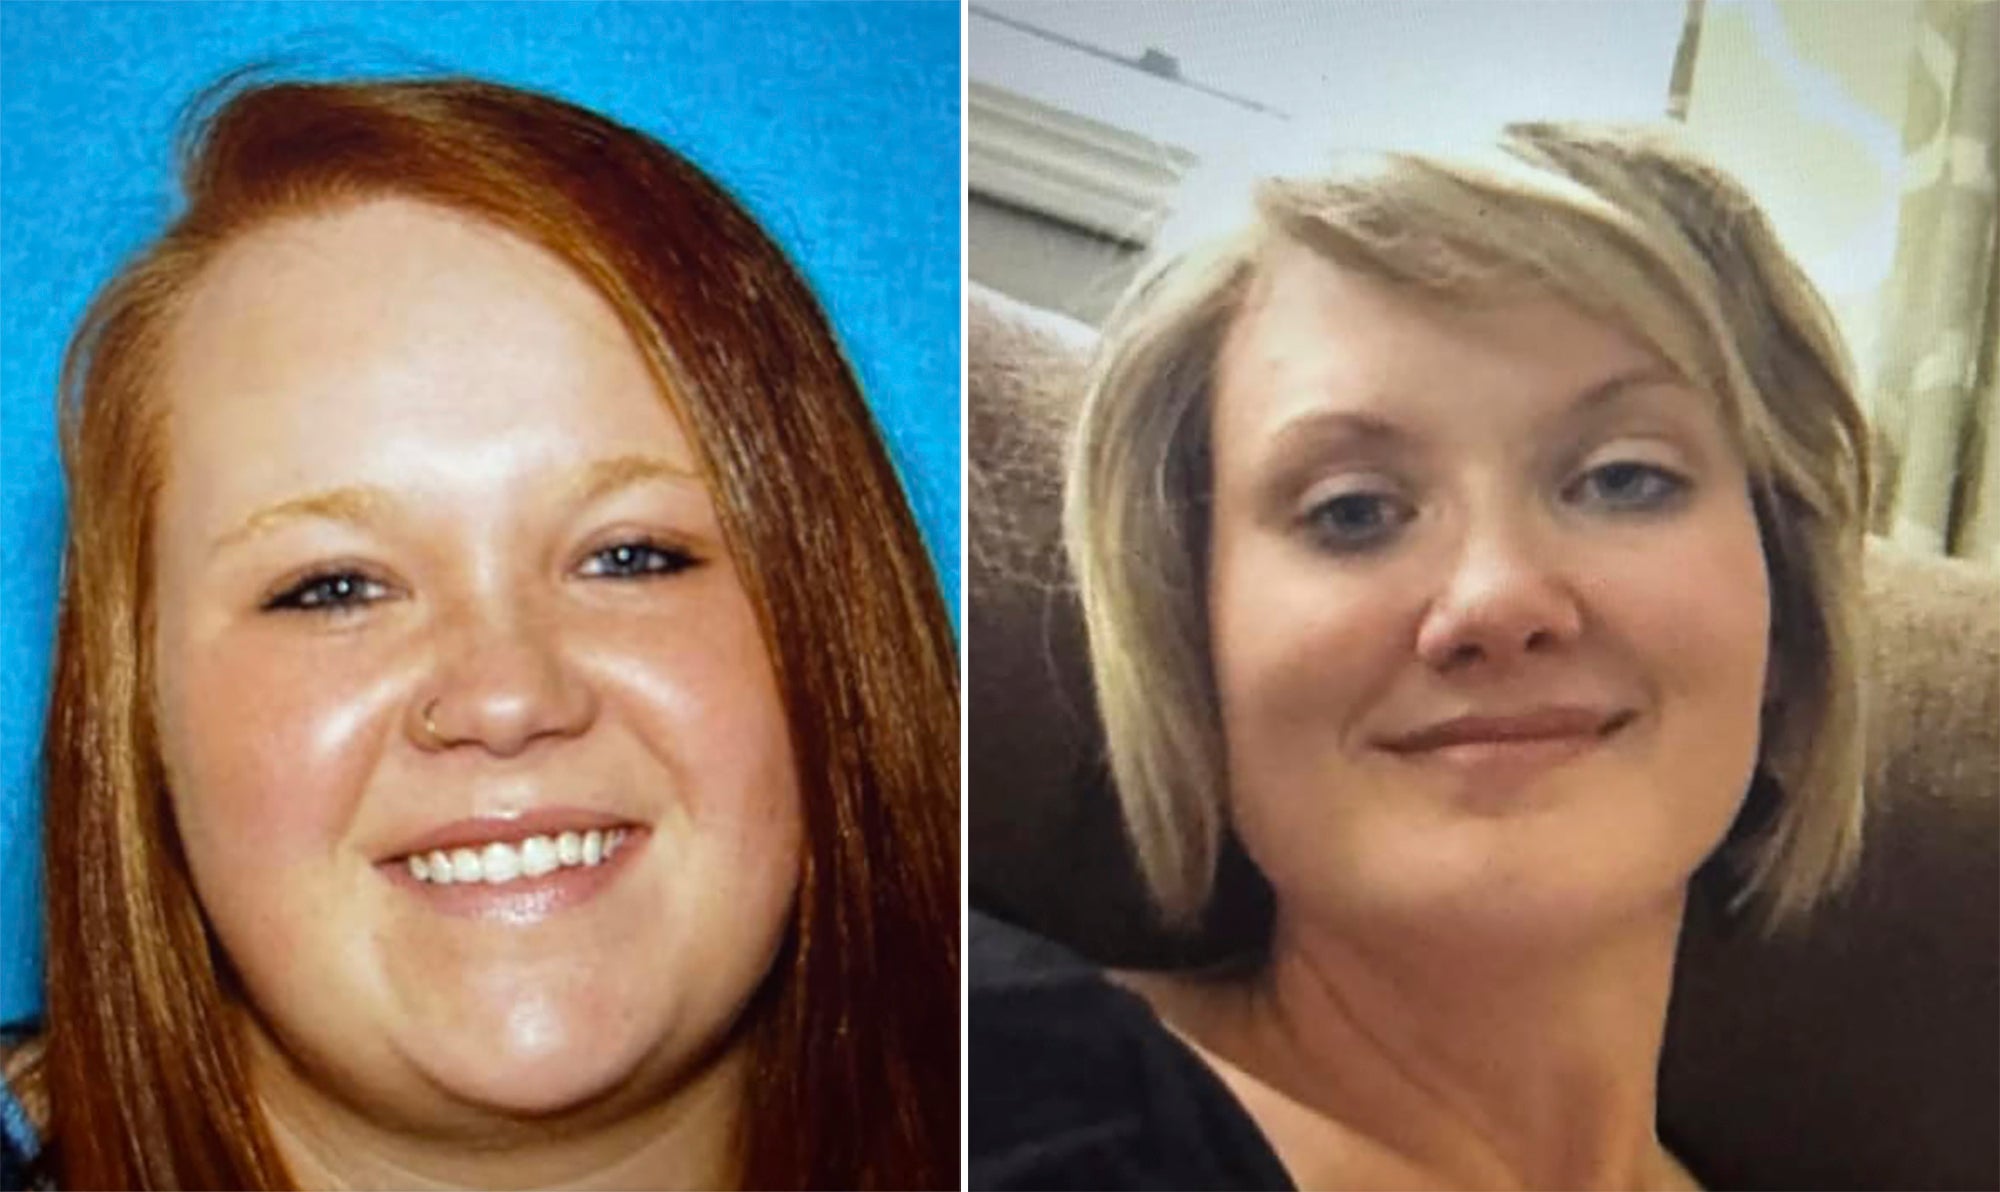 Veronica Butler, left, and Jilian Kelley, right, were murdered and their bodies were found on 13 April